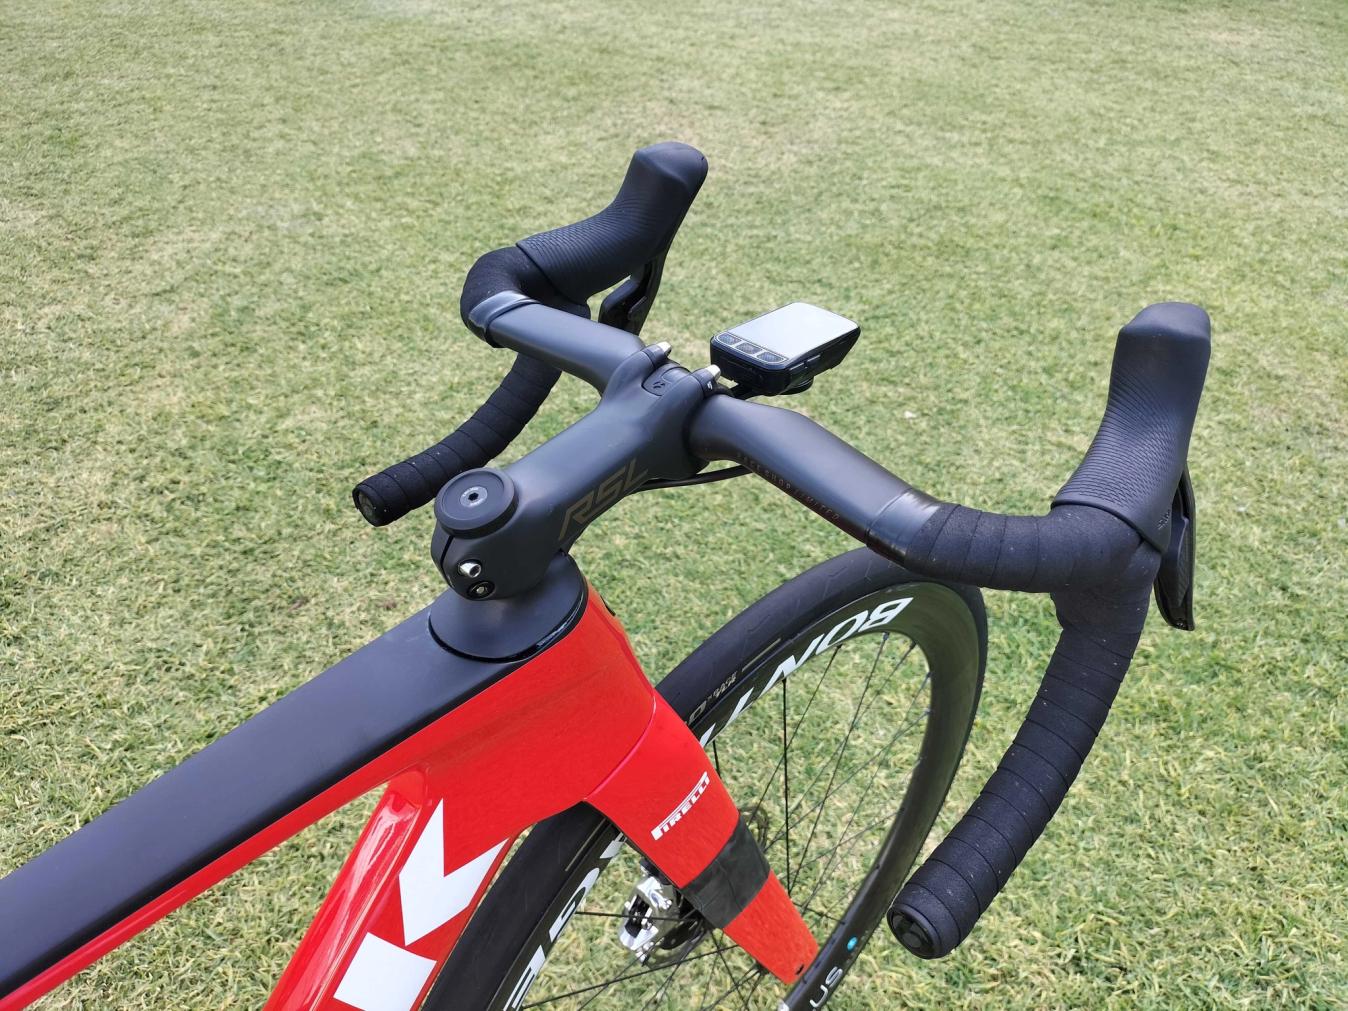 A two-piece bar and stem is an interesting choice for an aero bike